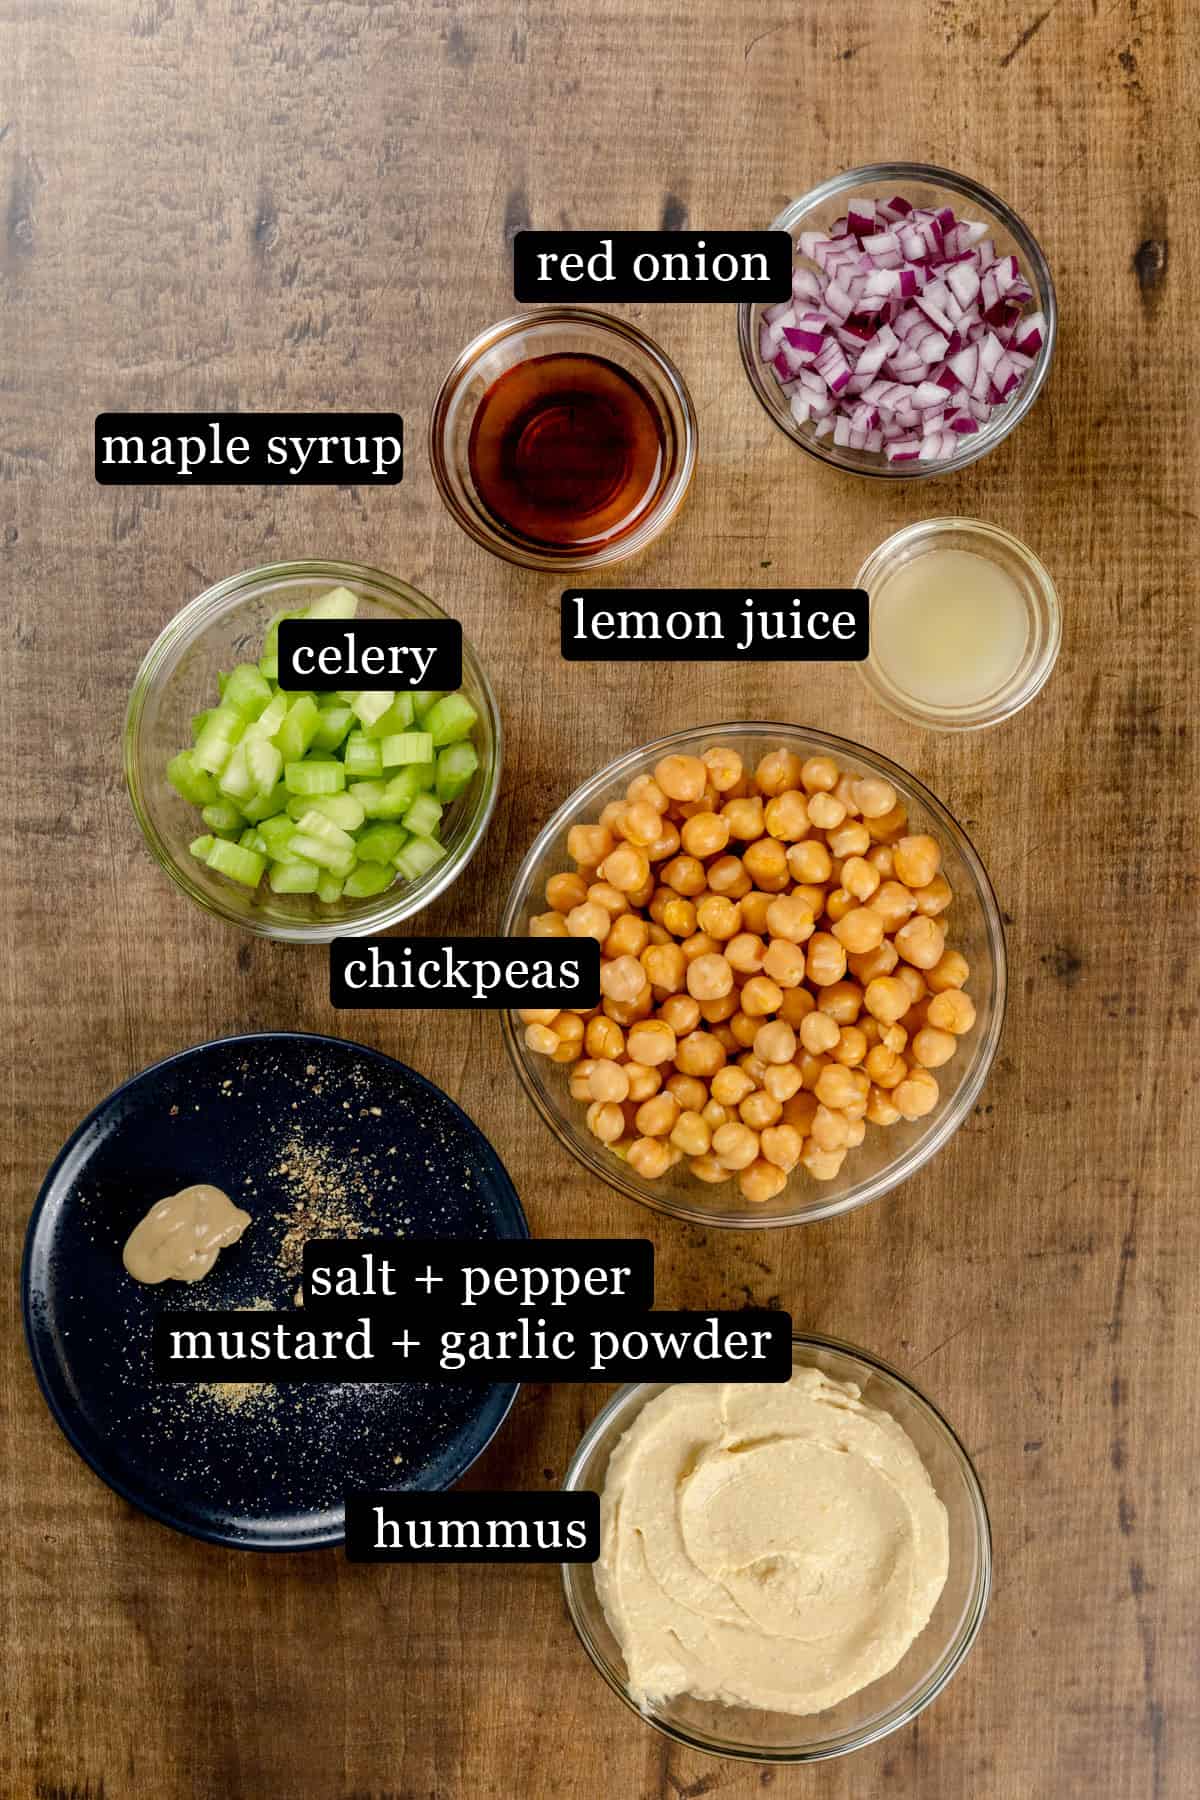 Ingredients for a chickpea of the sea sandwich in various glass bowls on a wood table. Black and white labels have been added to the image to name each ingredient, like chickpeas and lemon juice.